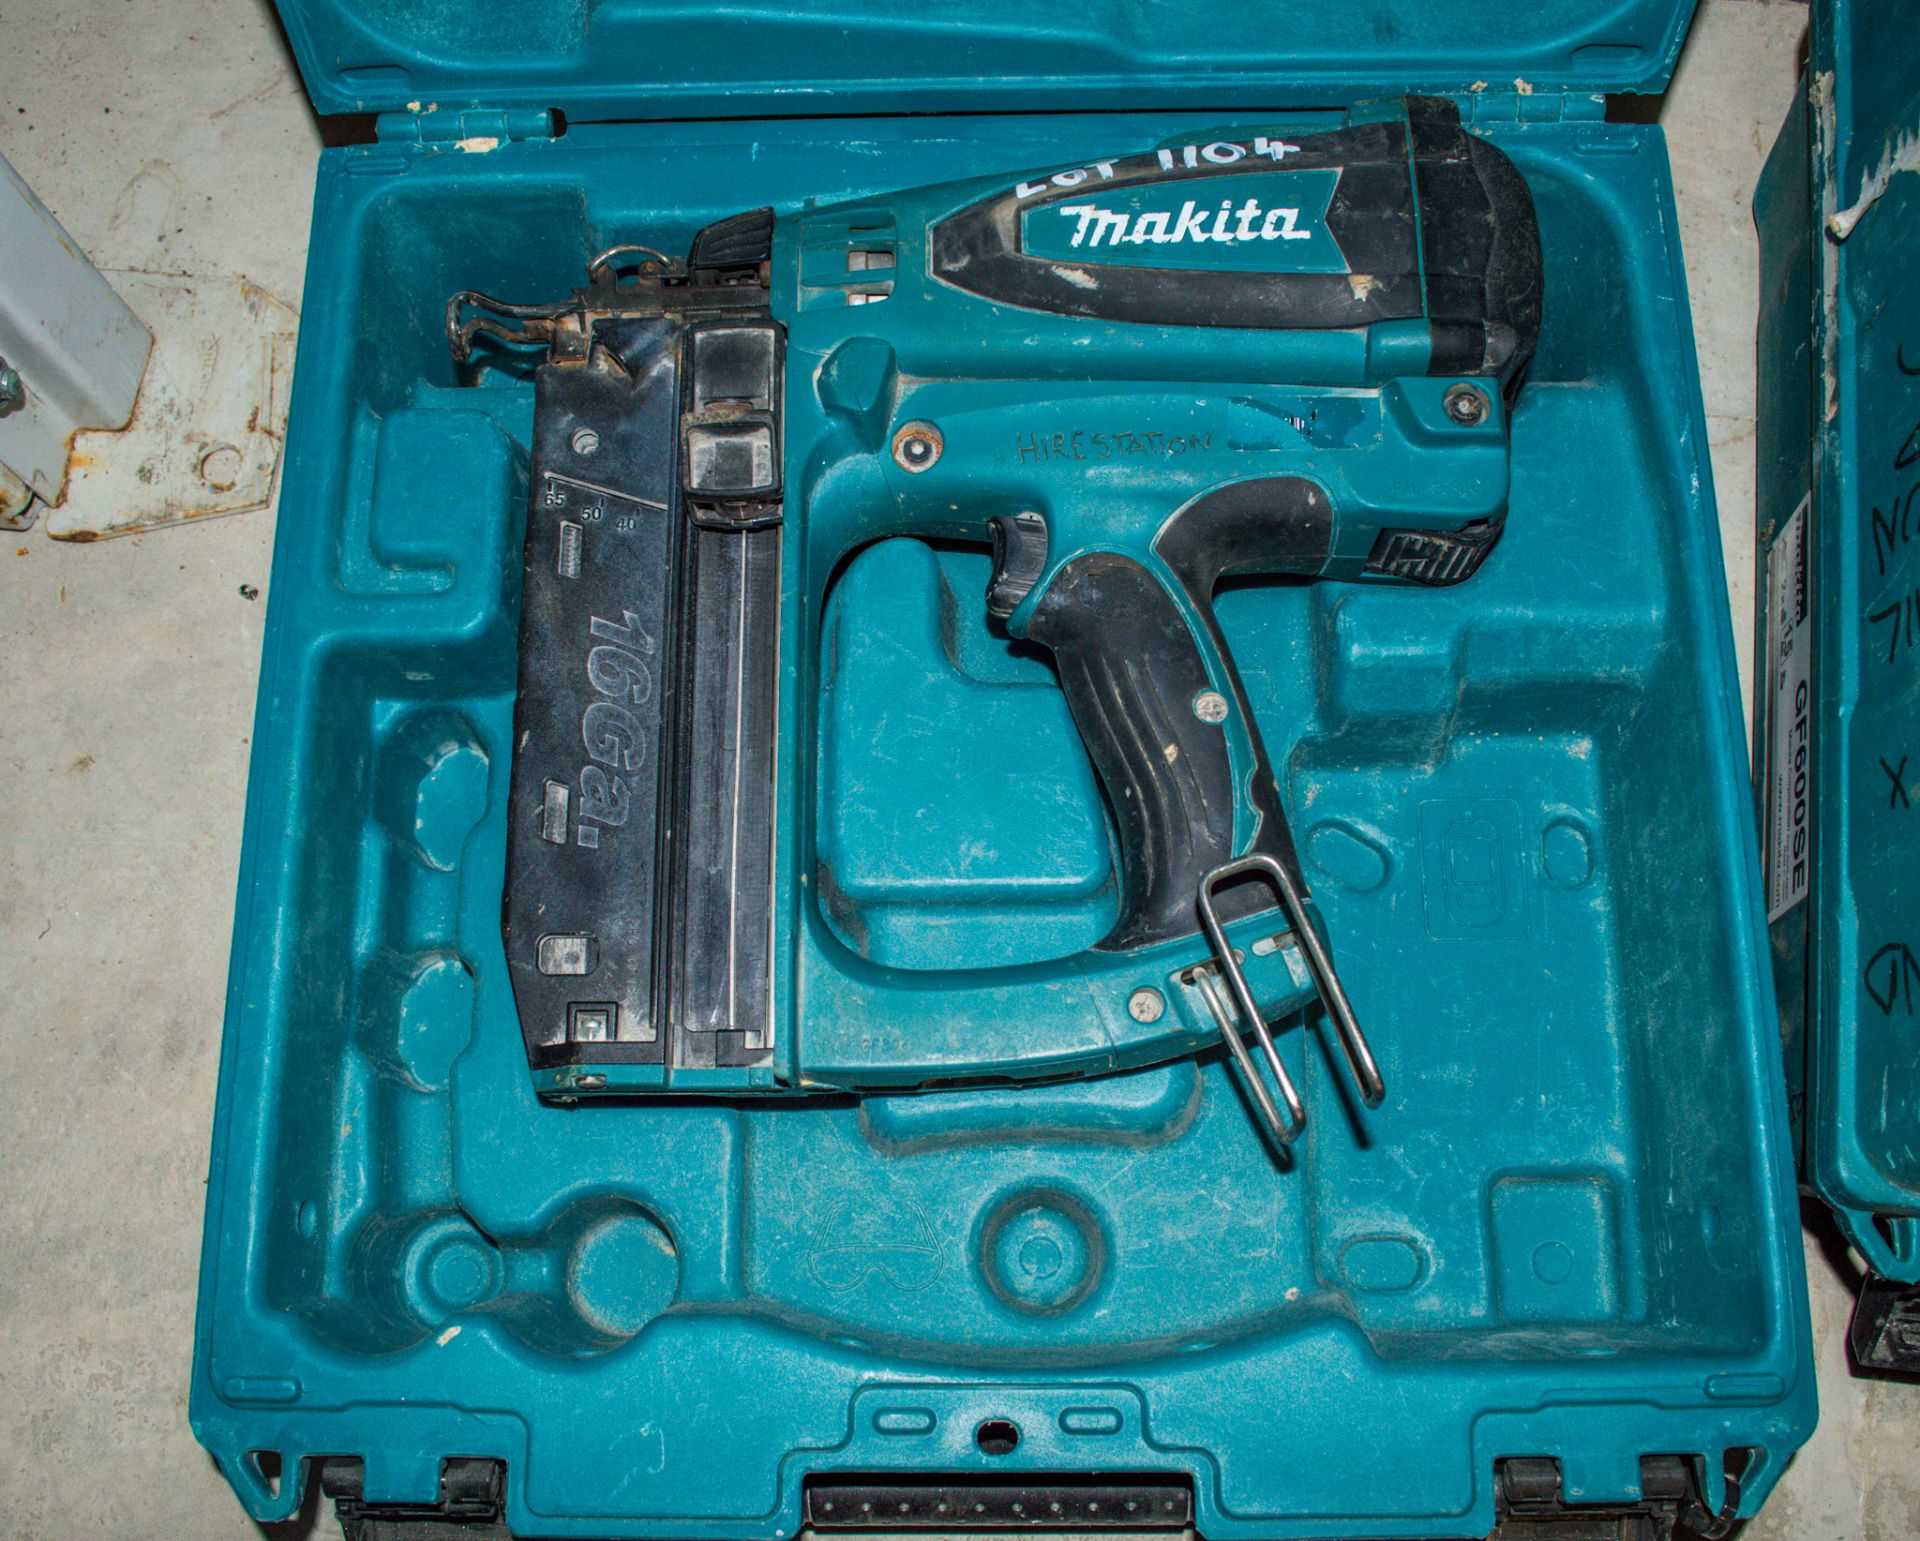 Makita staple gun c/w carry case ** No battery or charger ** MAK0099